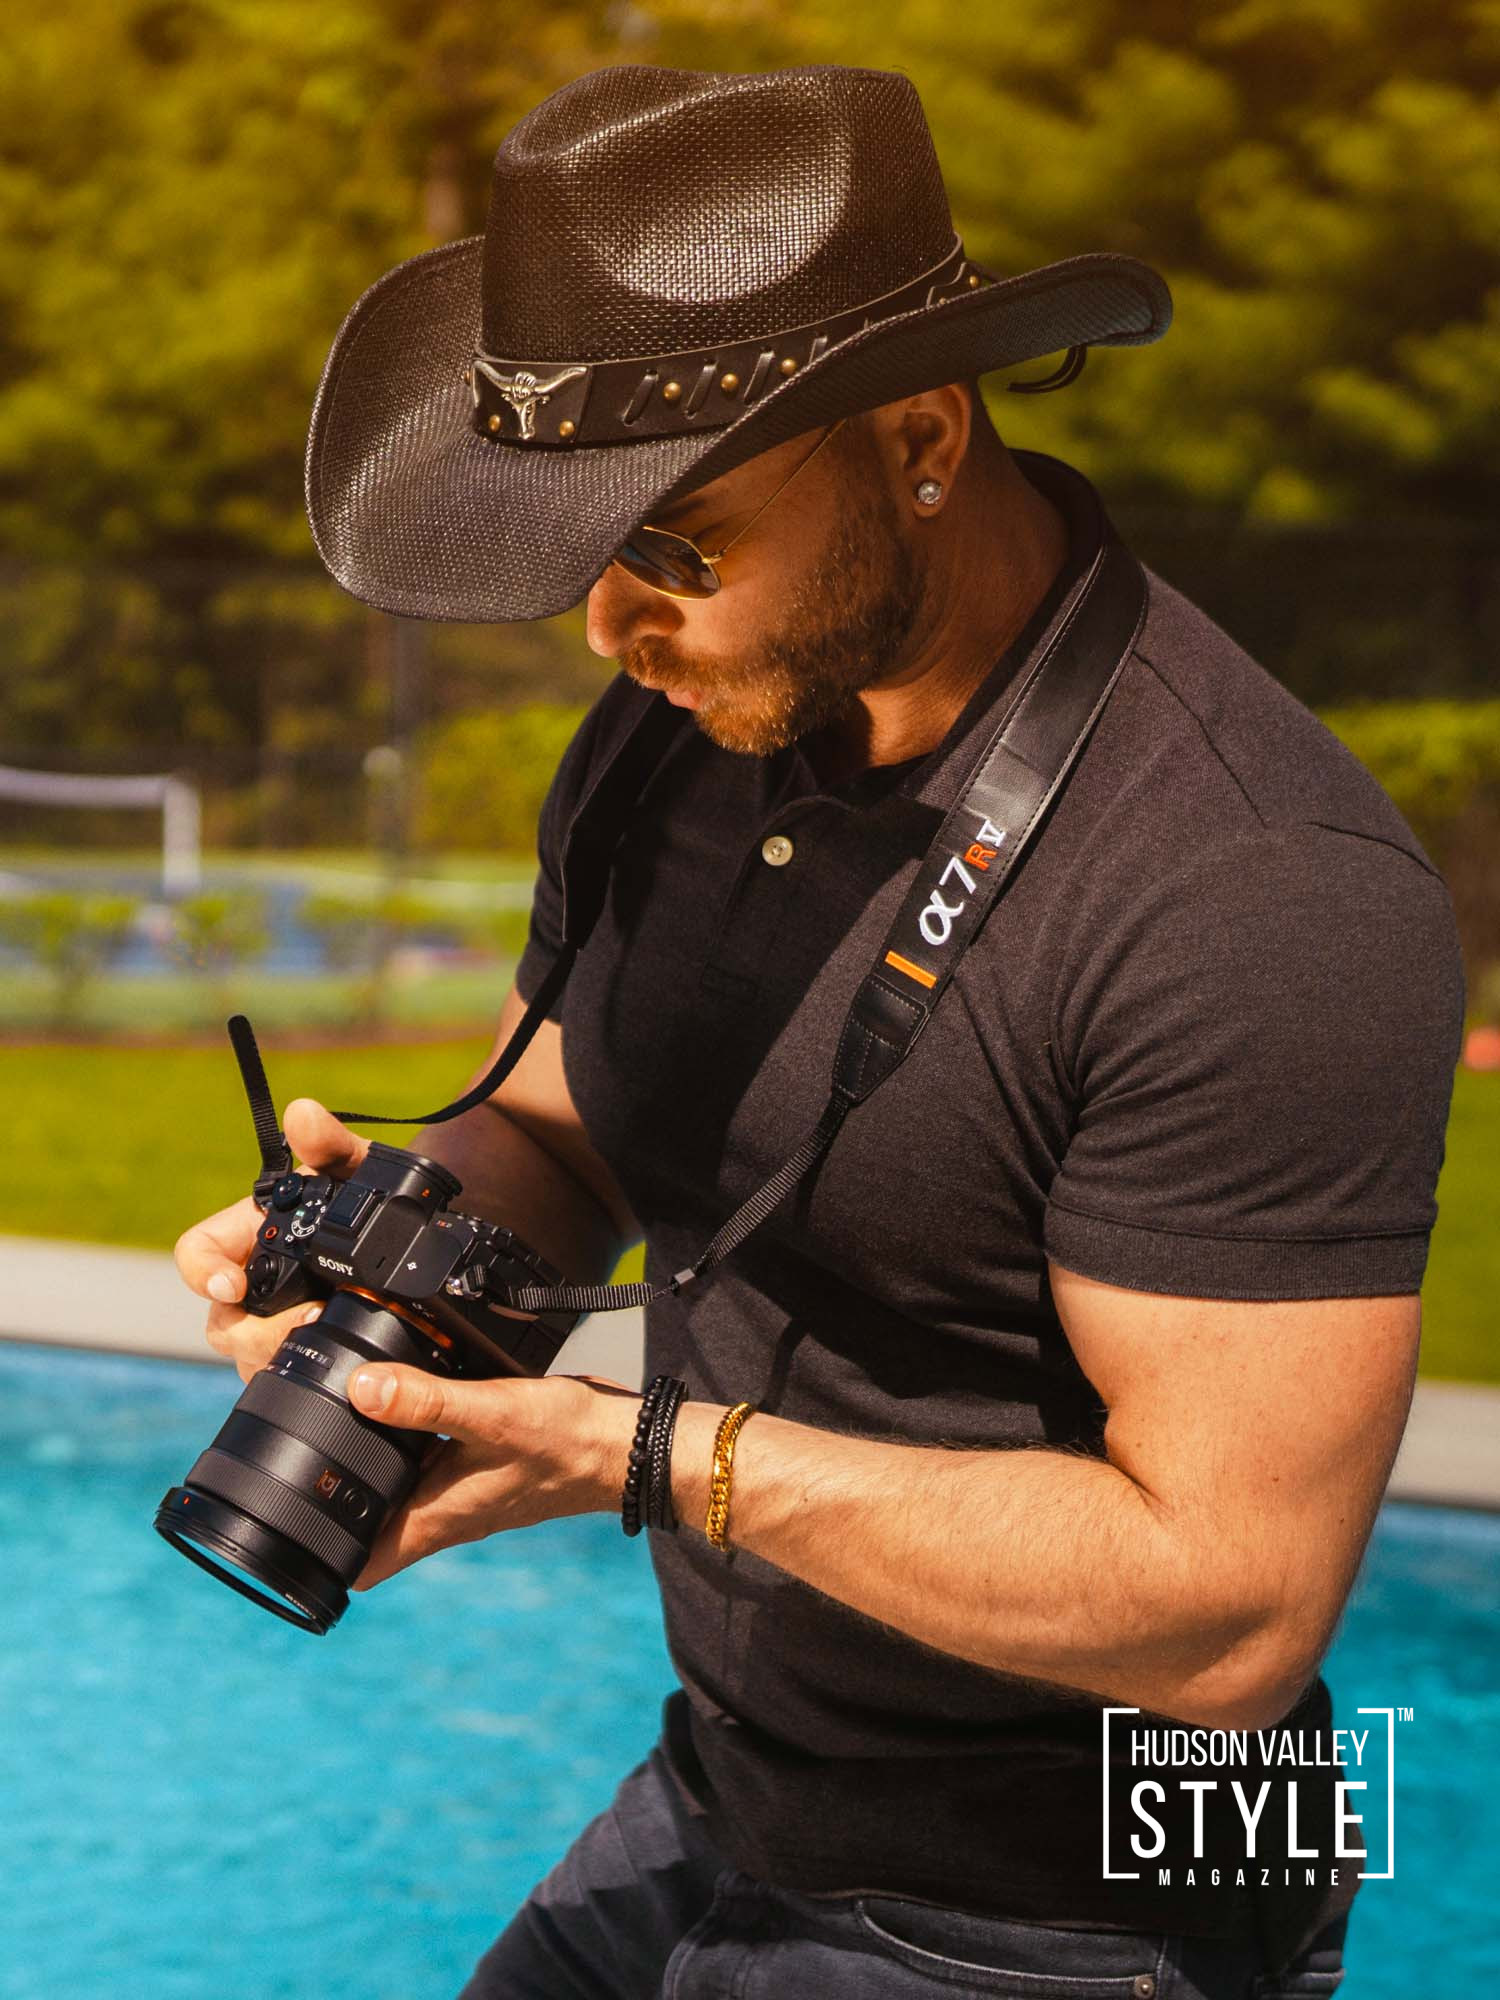 Capturing the Essence of Luxury: Top Rated Photographers in the Hudson Valley — Maxwell Alexander and his Editorial Lifestyle Photography Approach Photographing Luxury Hospitality – Presented by Alluvion Media